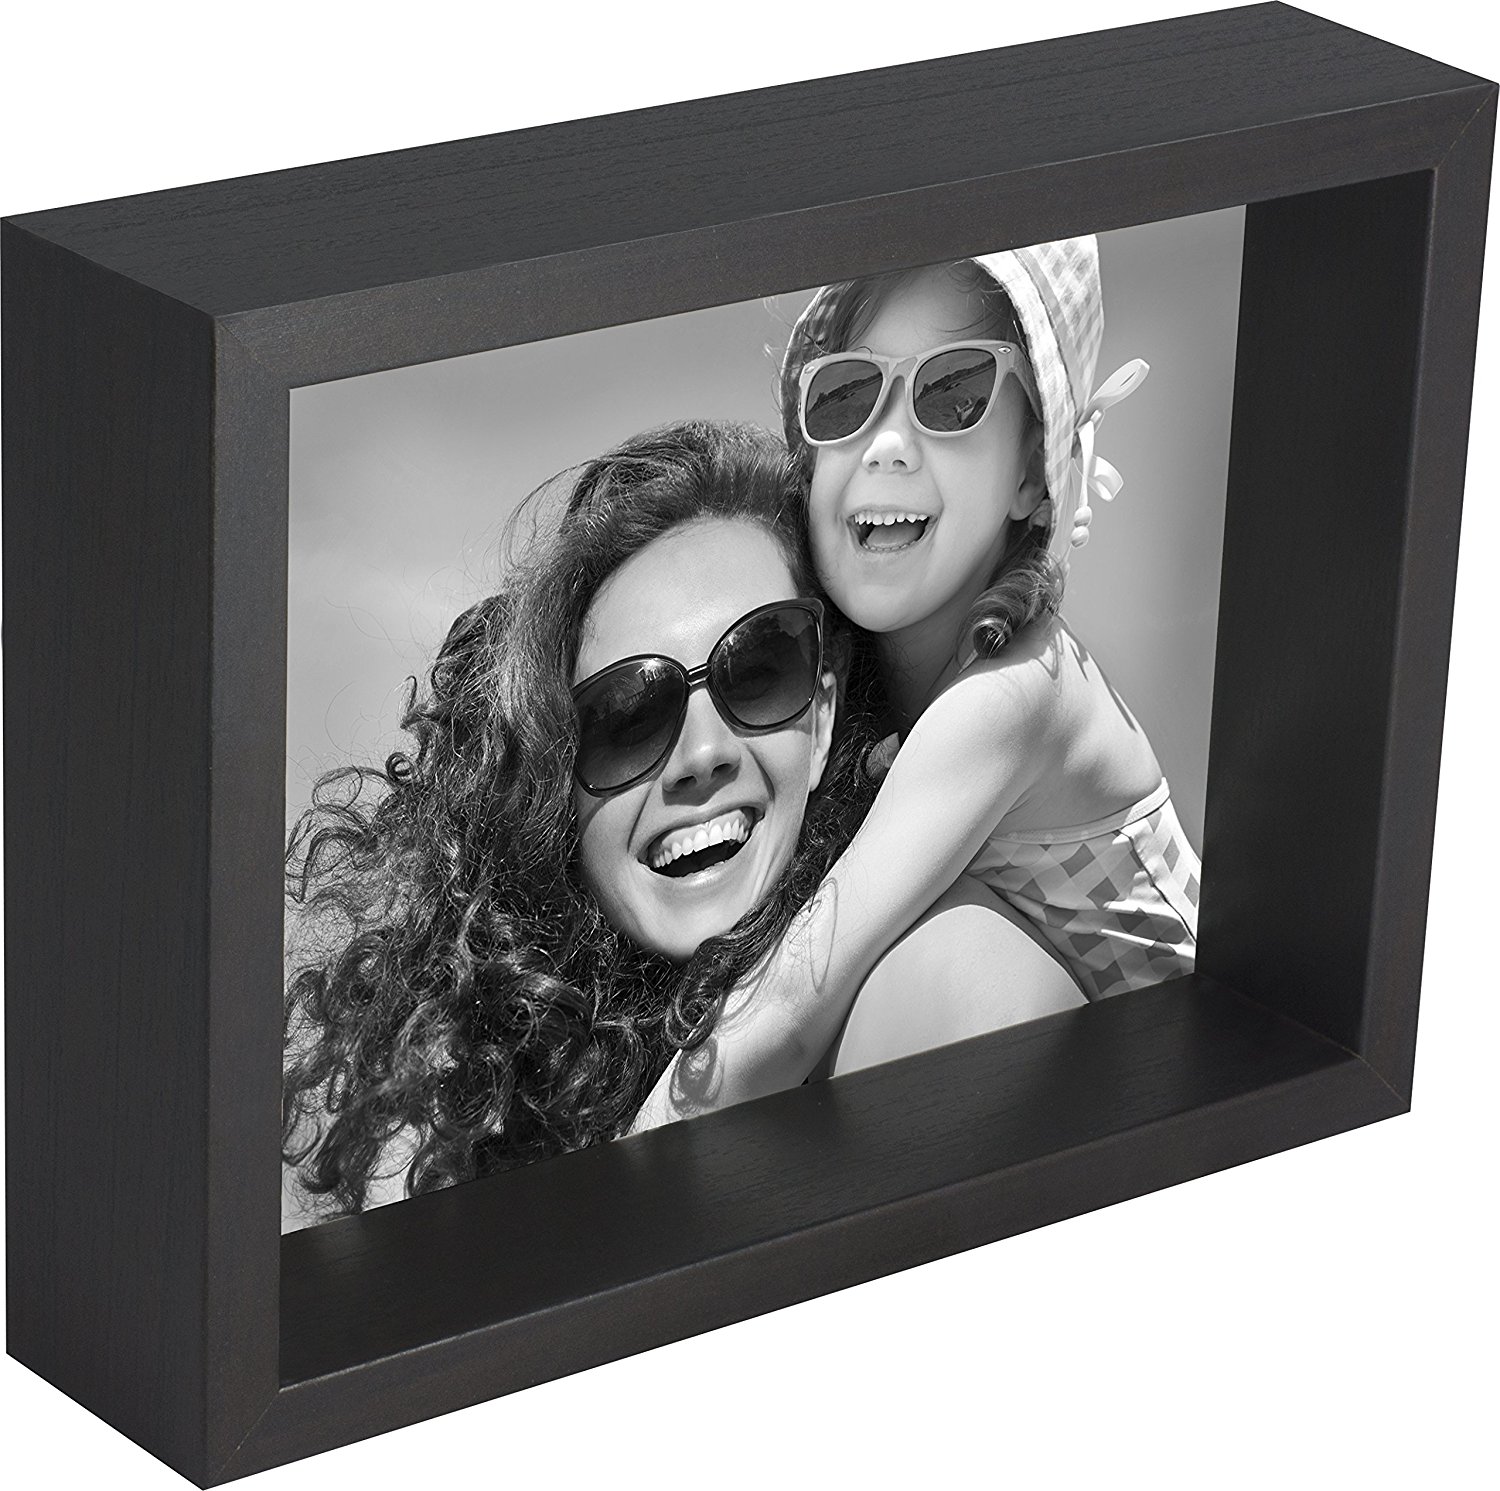 8 x 10-Inch Box Picture Photo Frame, Wenge